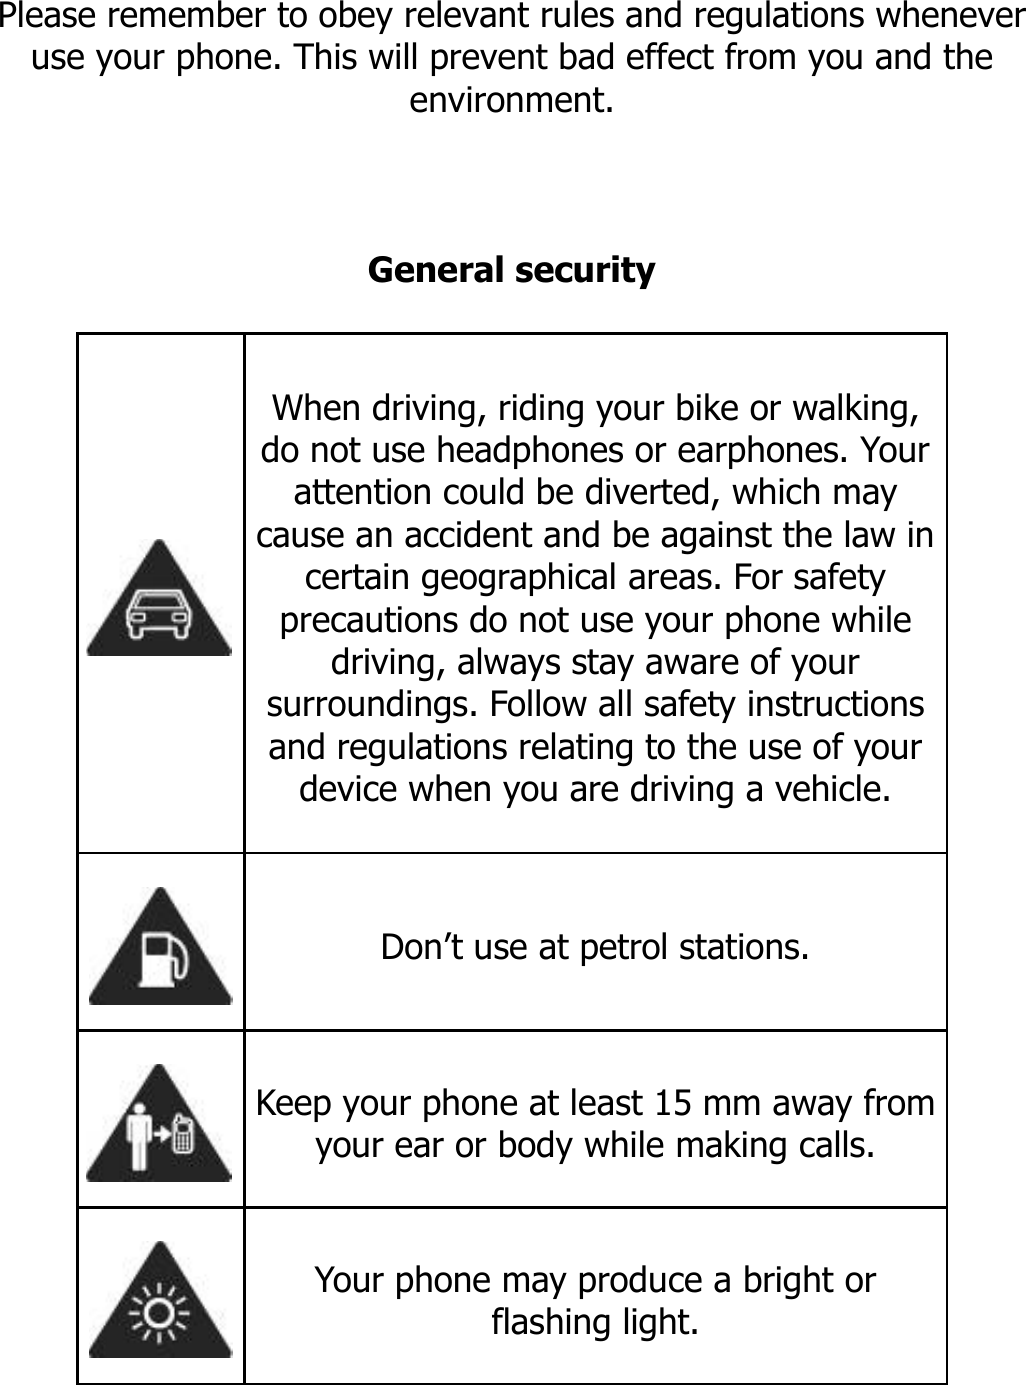       SECURITY INFORMATION  Please remember to obey relevant rules and regulations whenever use your phone. This will prevent bad effect from you and the environment.    General security   When driving, riding your bike or walking, do not use headphones or earphones. Your attention could be diverted, which may cause an accident and be against the law in certain geographical areas. For safety precautions do not use your phone while driving, always stay aware of your surroundings. Follow all safety instructions and regulations relating to the use of your device when you are driving a vehicle.   Don’t use at petrol stations.  Keep your phone at least 15 mm away from your ear or body while making calls.  Your phone may produce a bright or flashing light. 